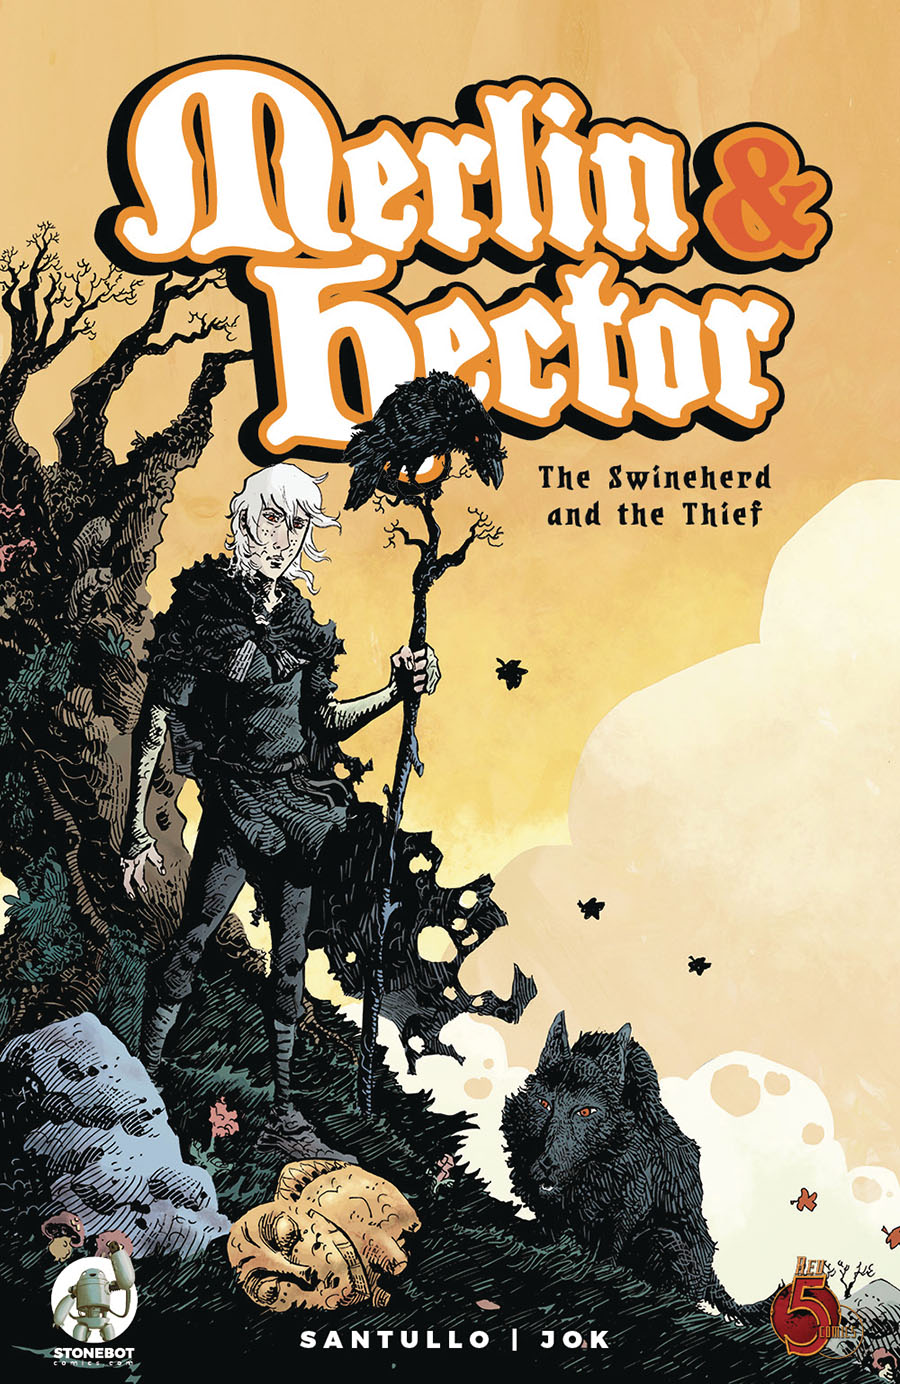 Merlin & Hector Vol 1 The Swineherd And The Thief TP